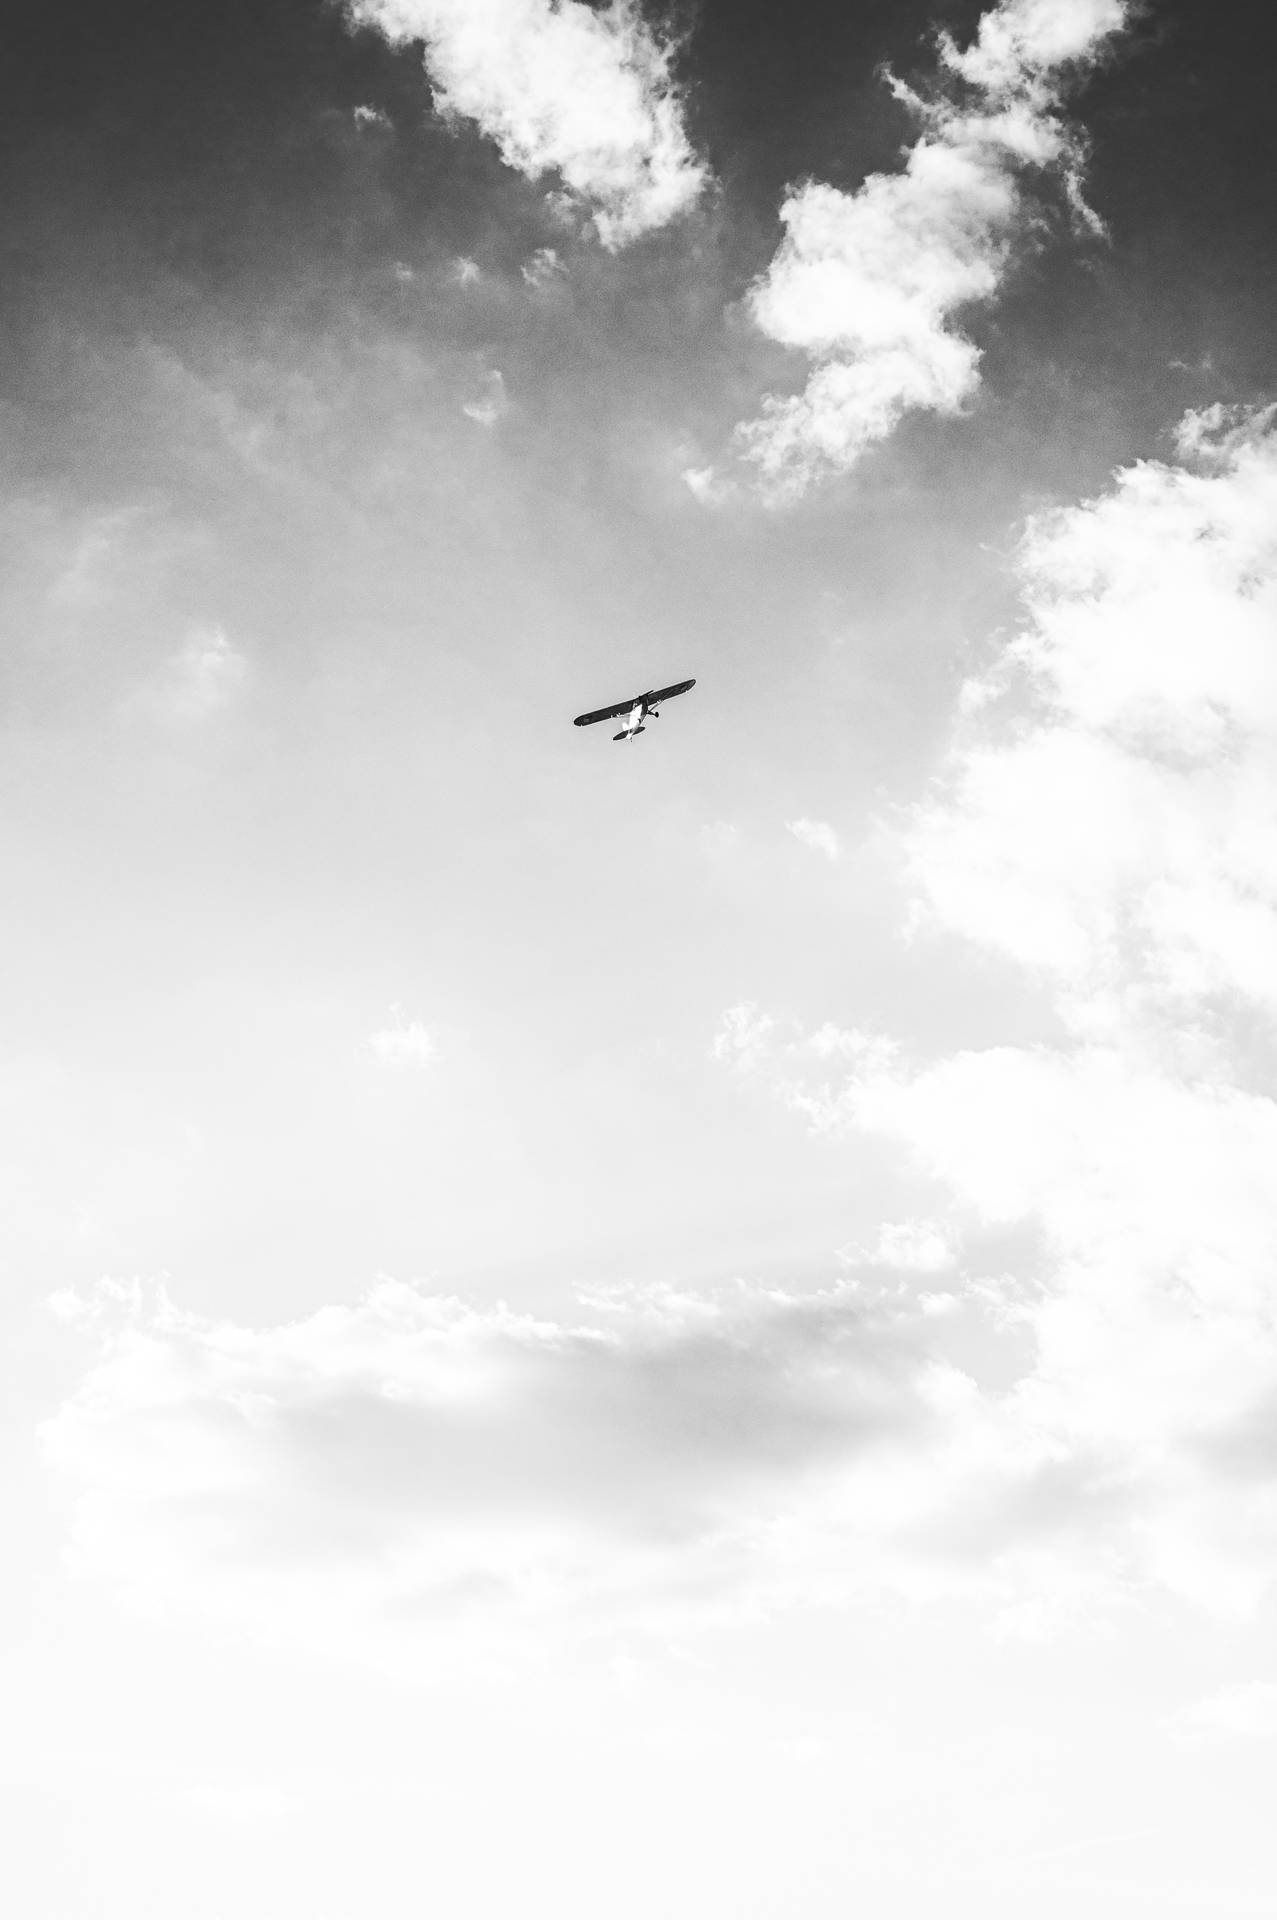 A small plane flying through a cloudy sky. - 